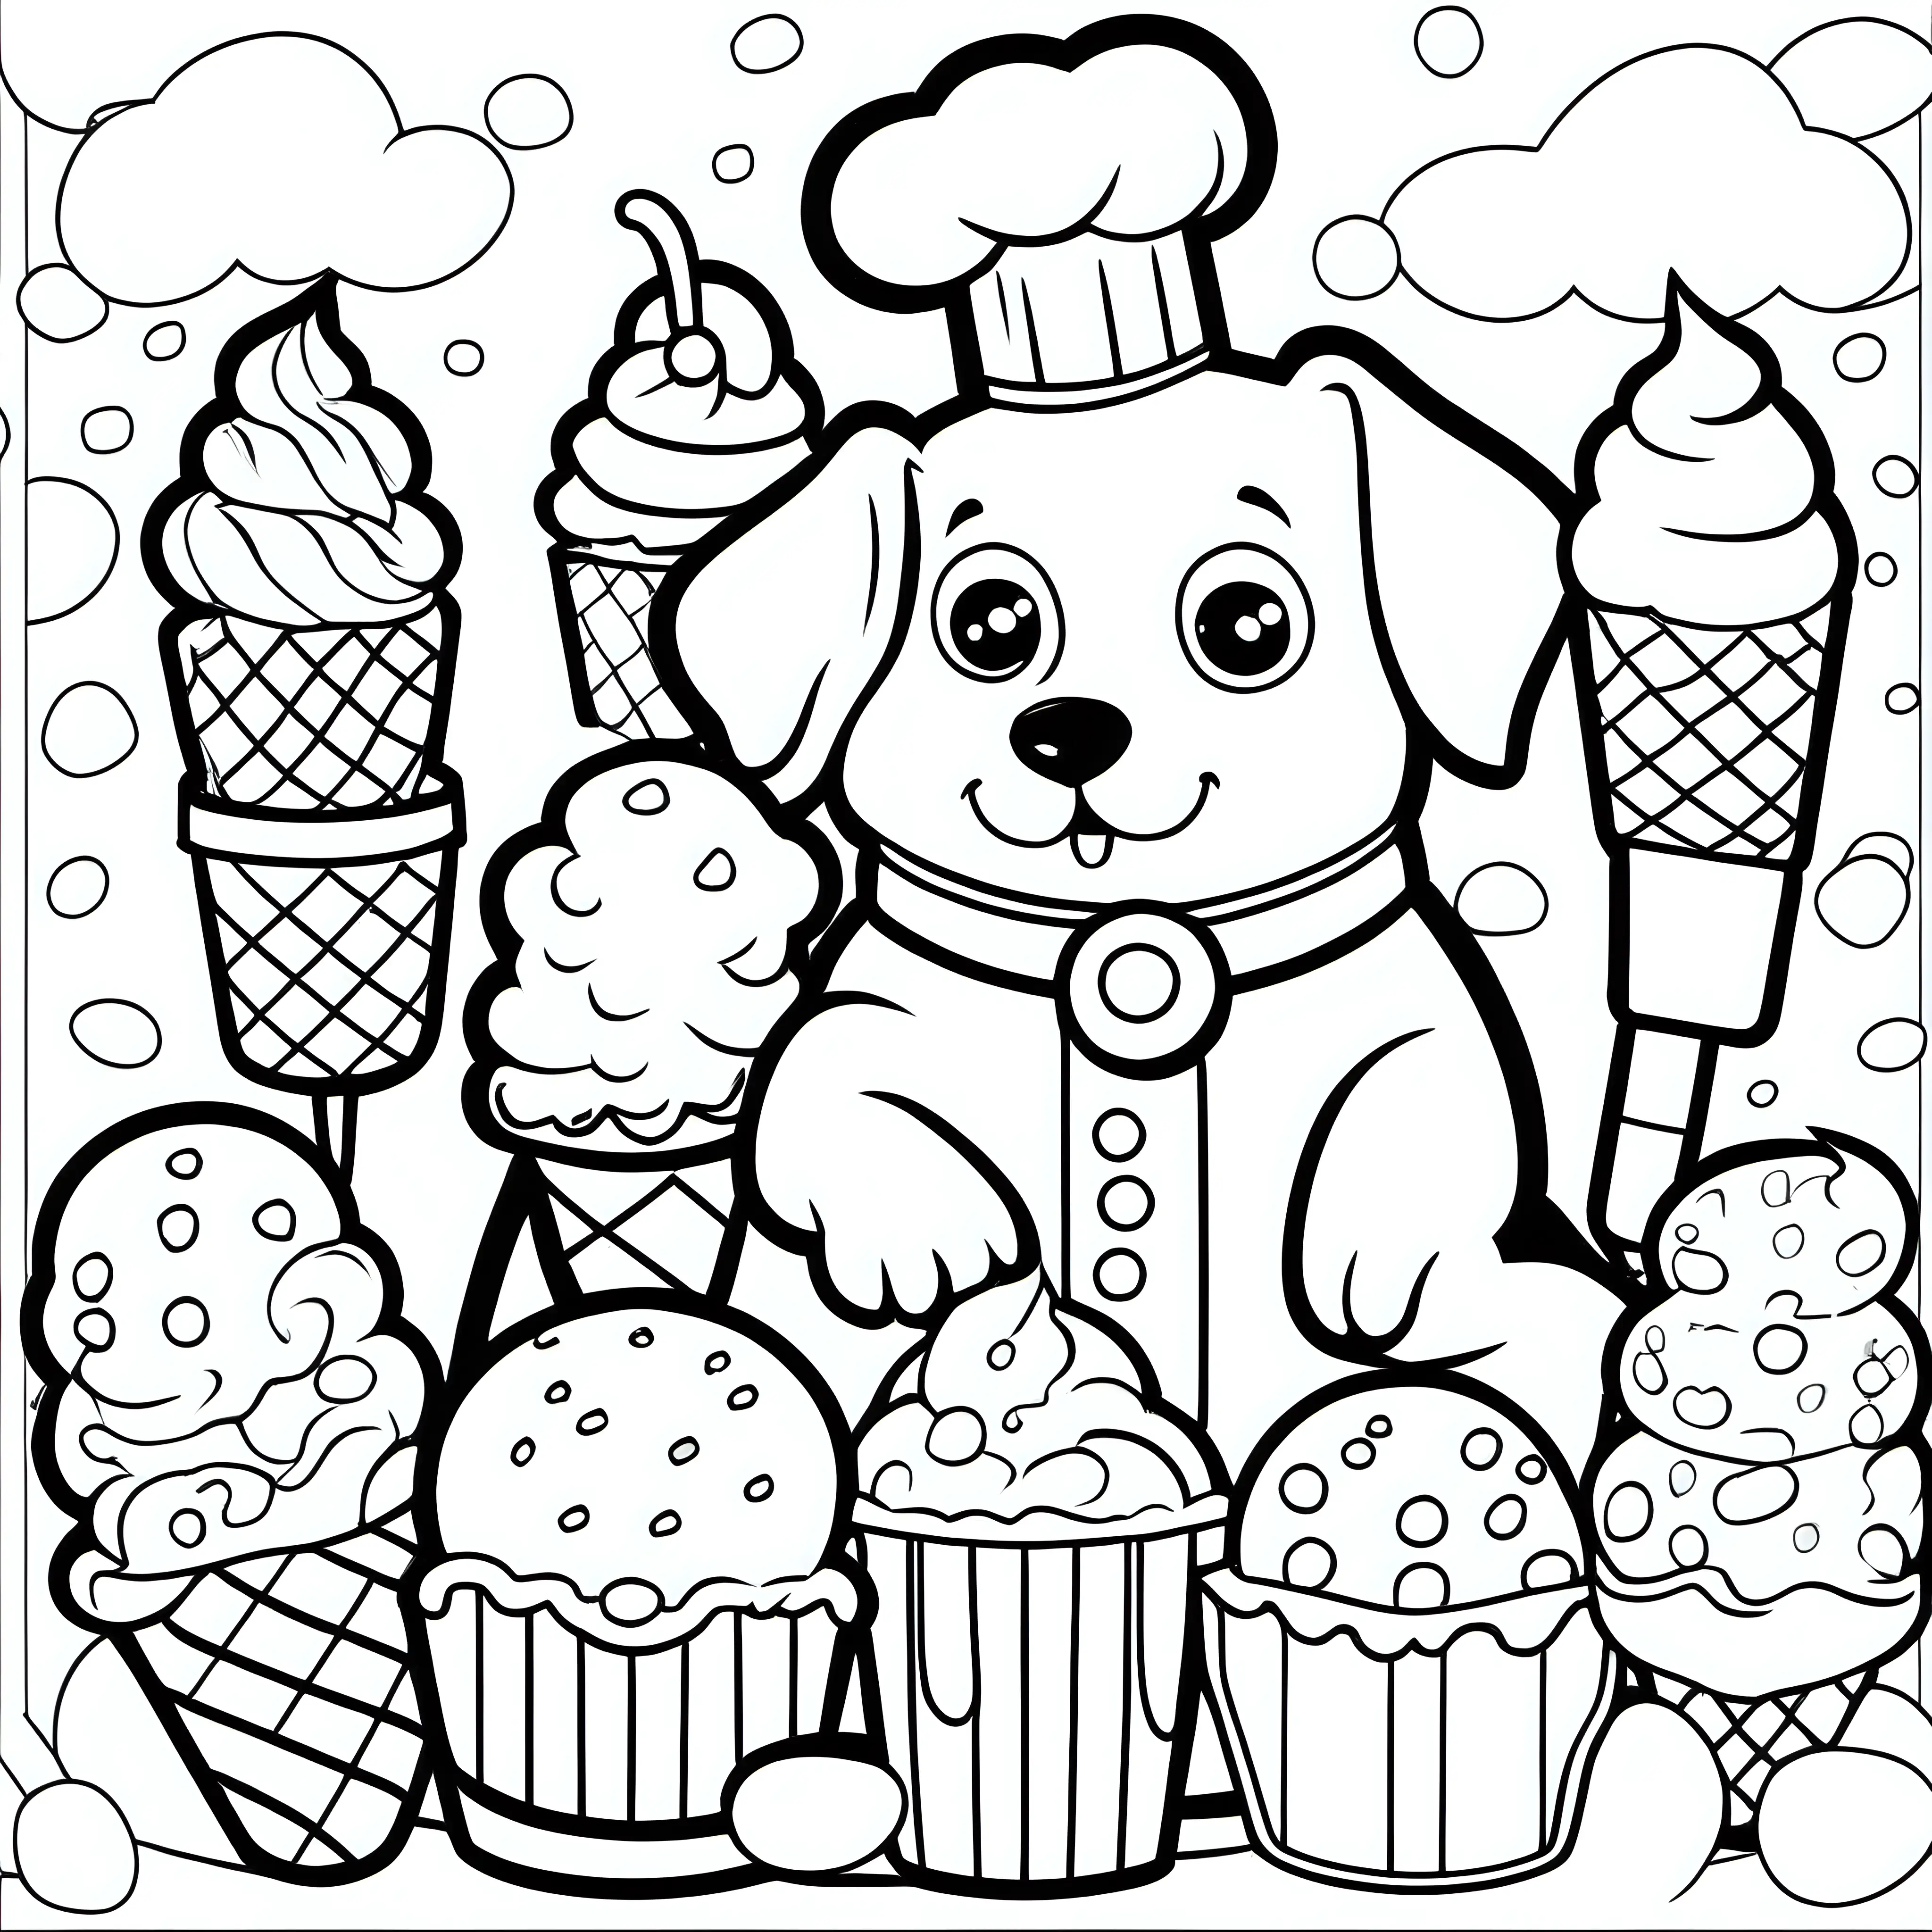 Adorable Dog Chef in Ice Cream Wonderland Coloring Page